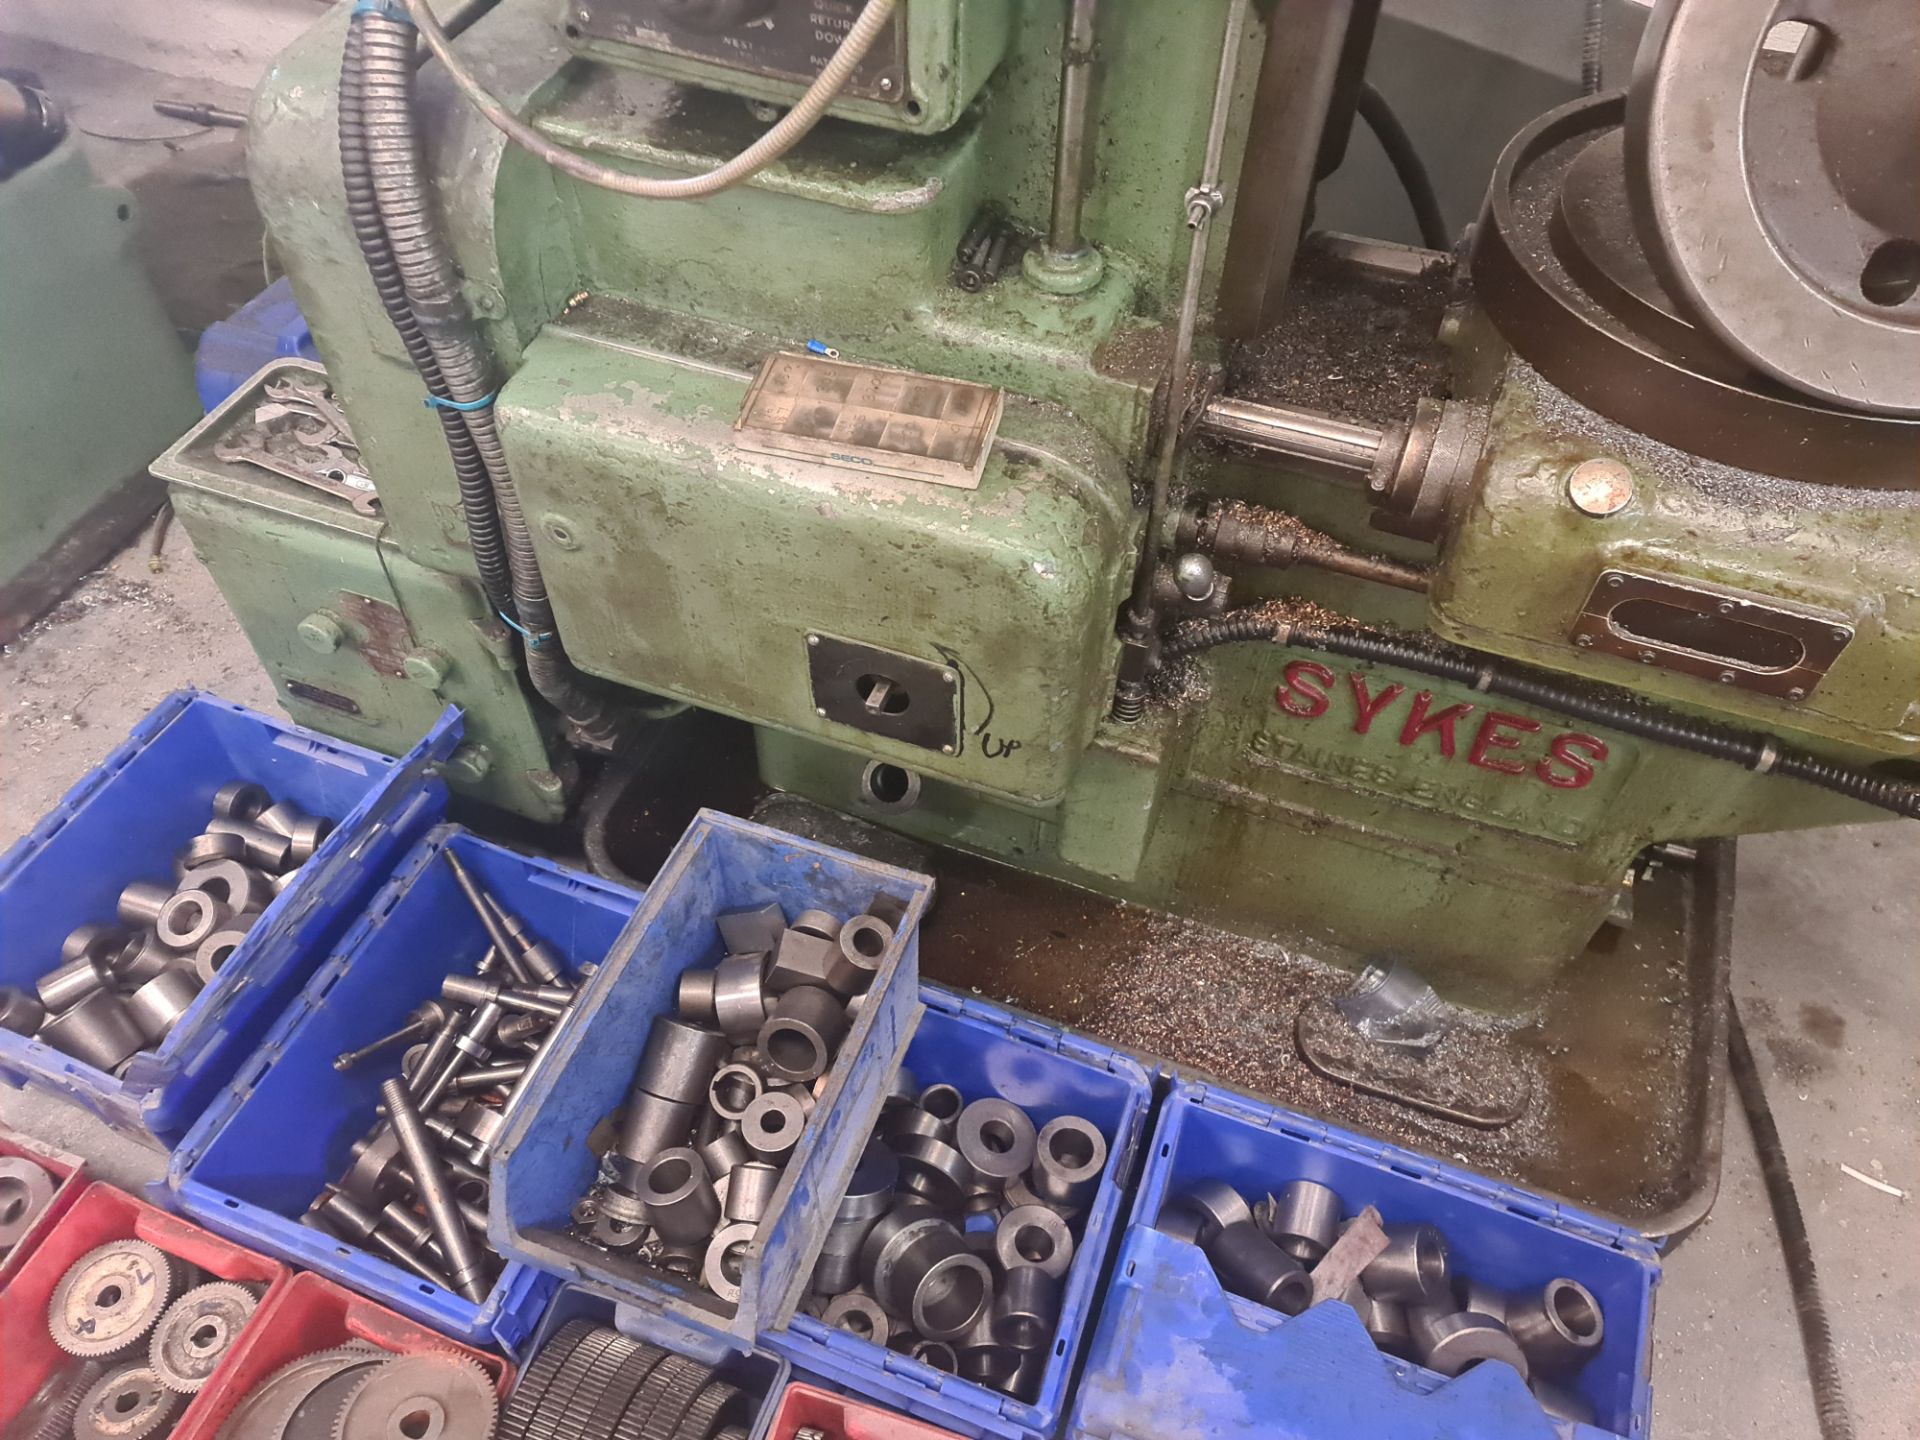 Sykes HV14 gear hobbing machine. This lot includes the crates & contents immediately surrounding th - Image 12 of 23